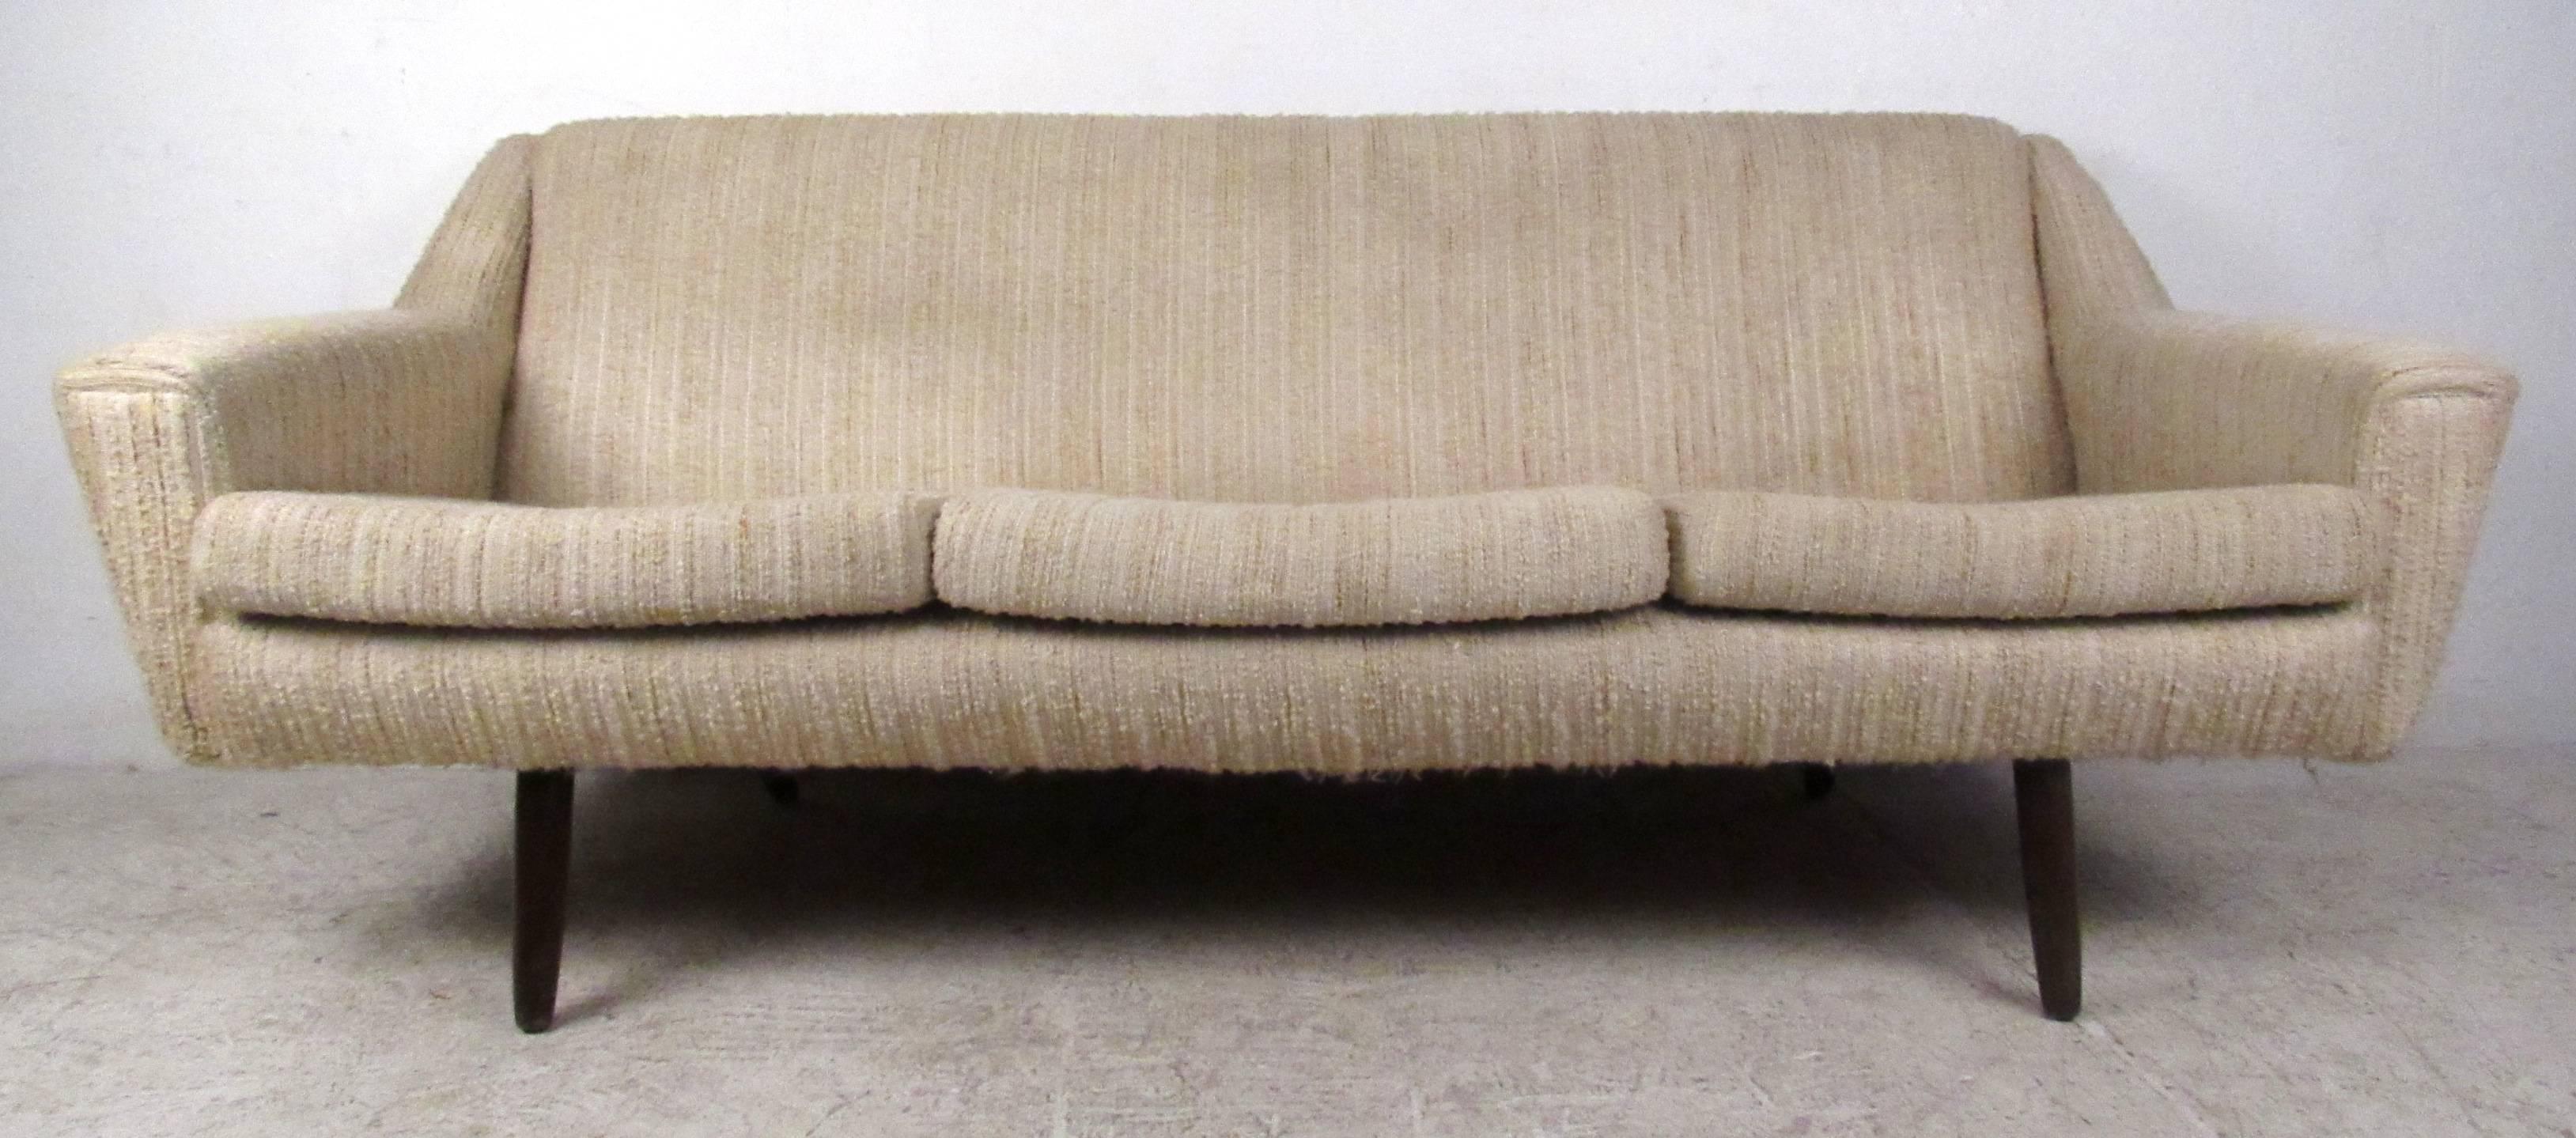 Vintage modern sofa featuring upholstered removable cushions and tapered legs. Stylish lightweight sofa with Danish modern design is perfect for home or business seating areas. 

Please confirm item location NY or NJ with dealer.